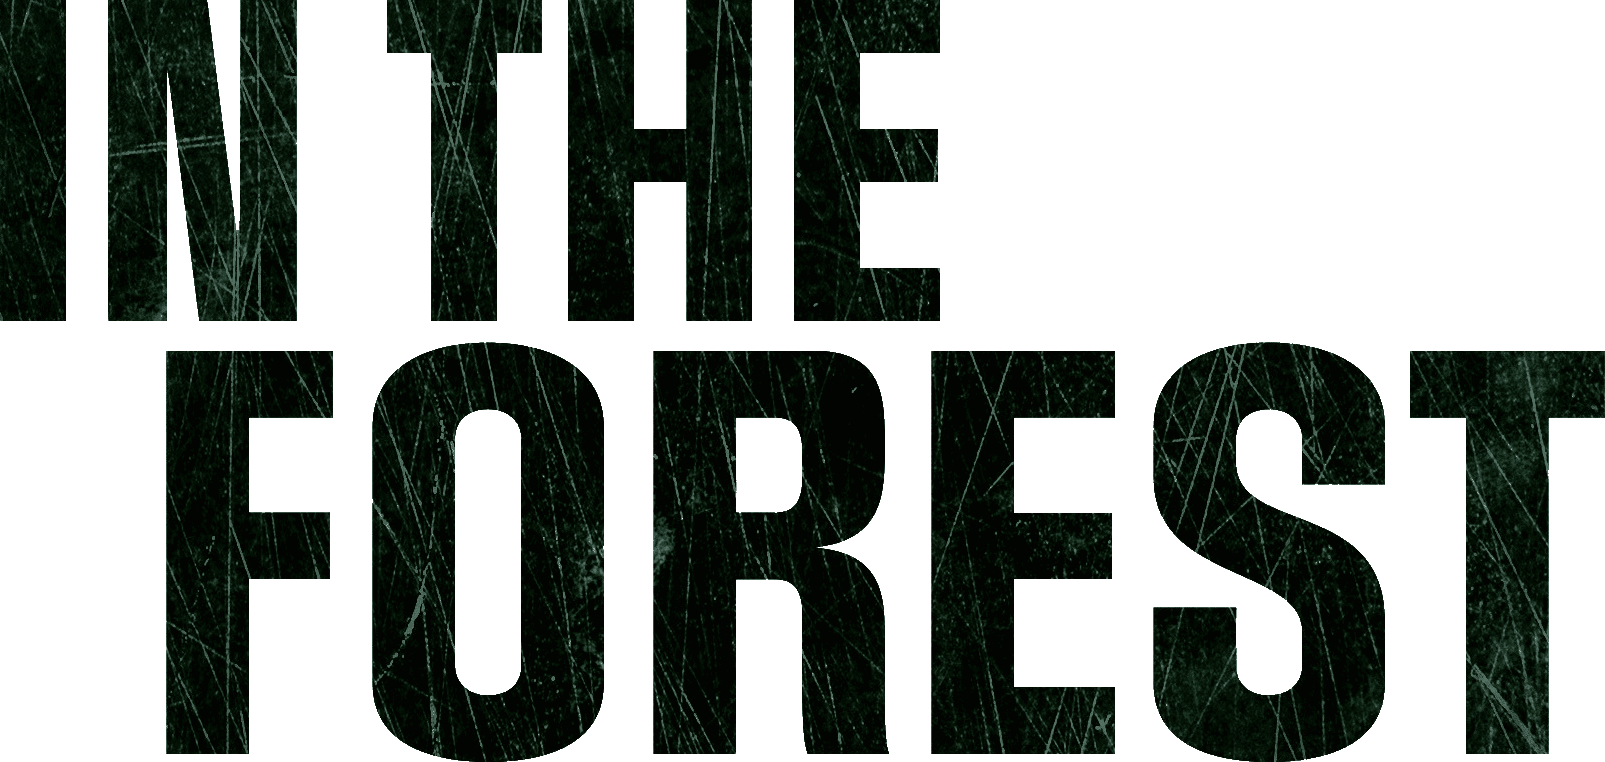 In the Forest logo